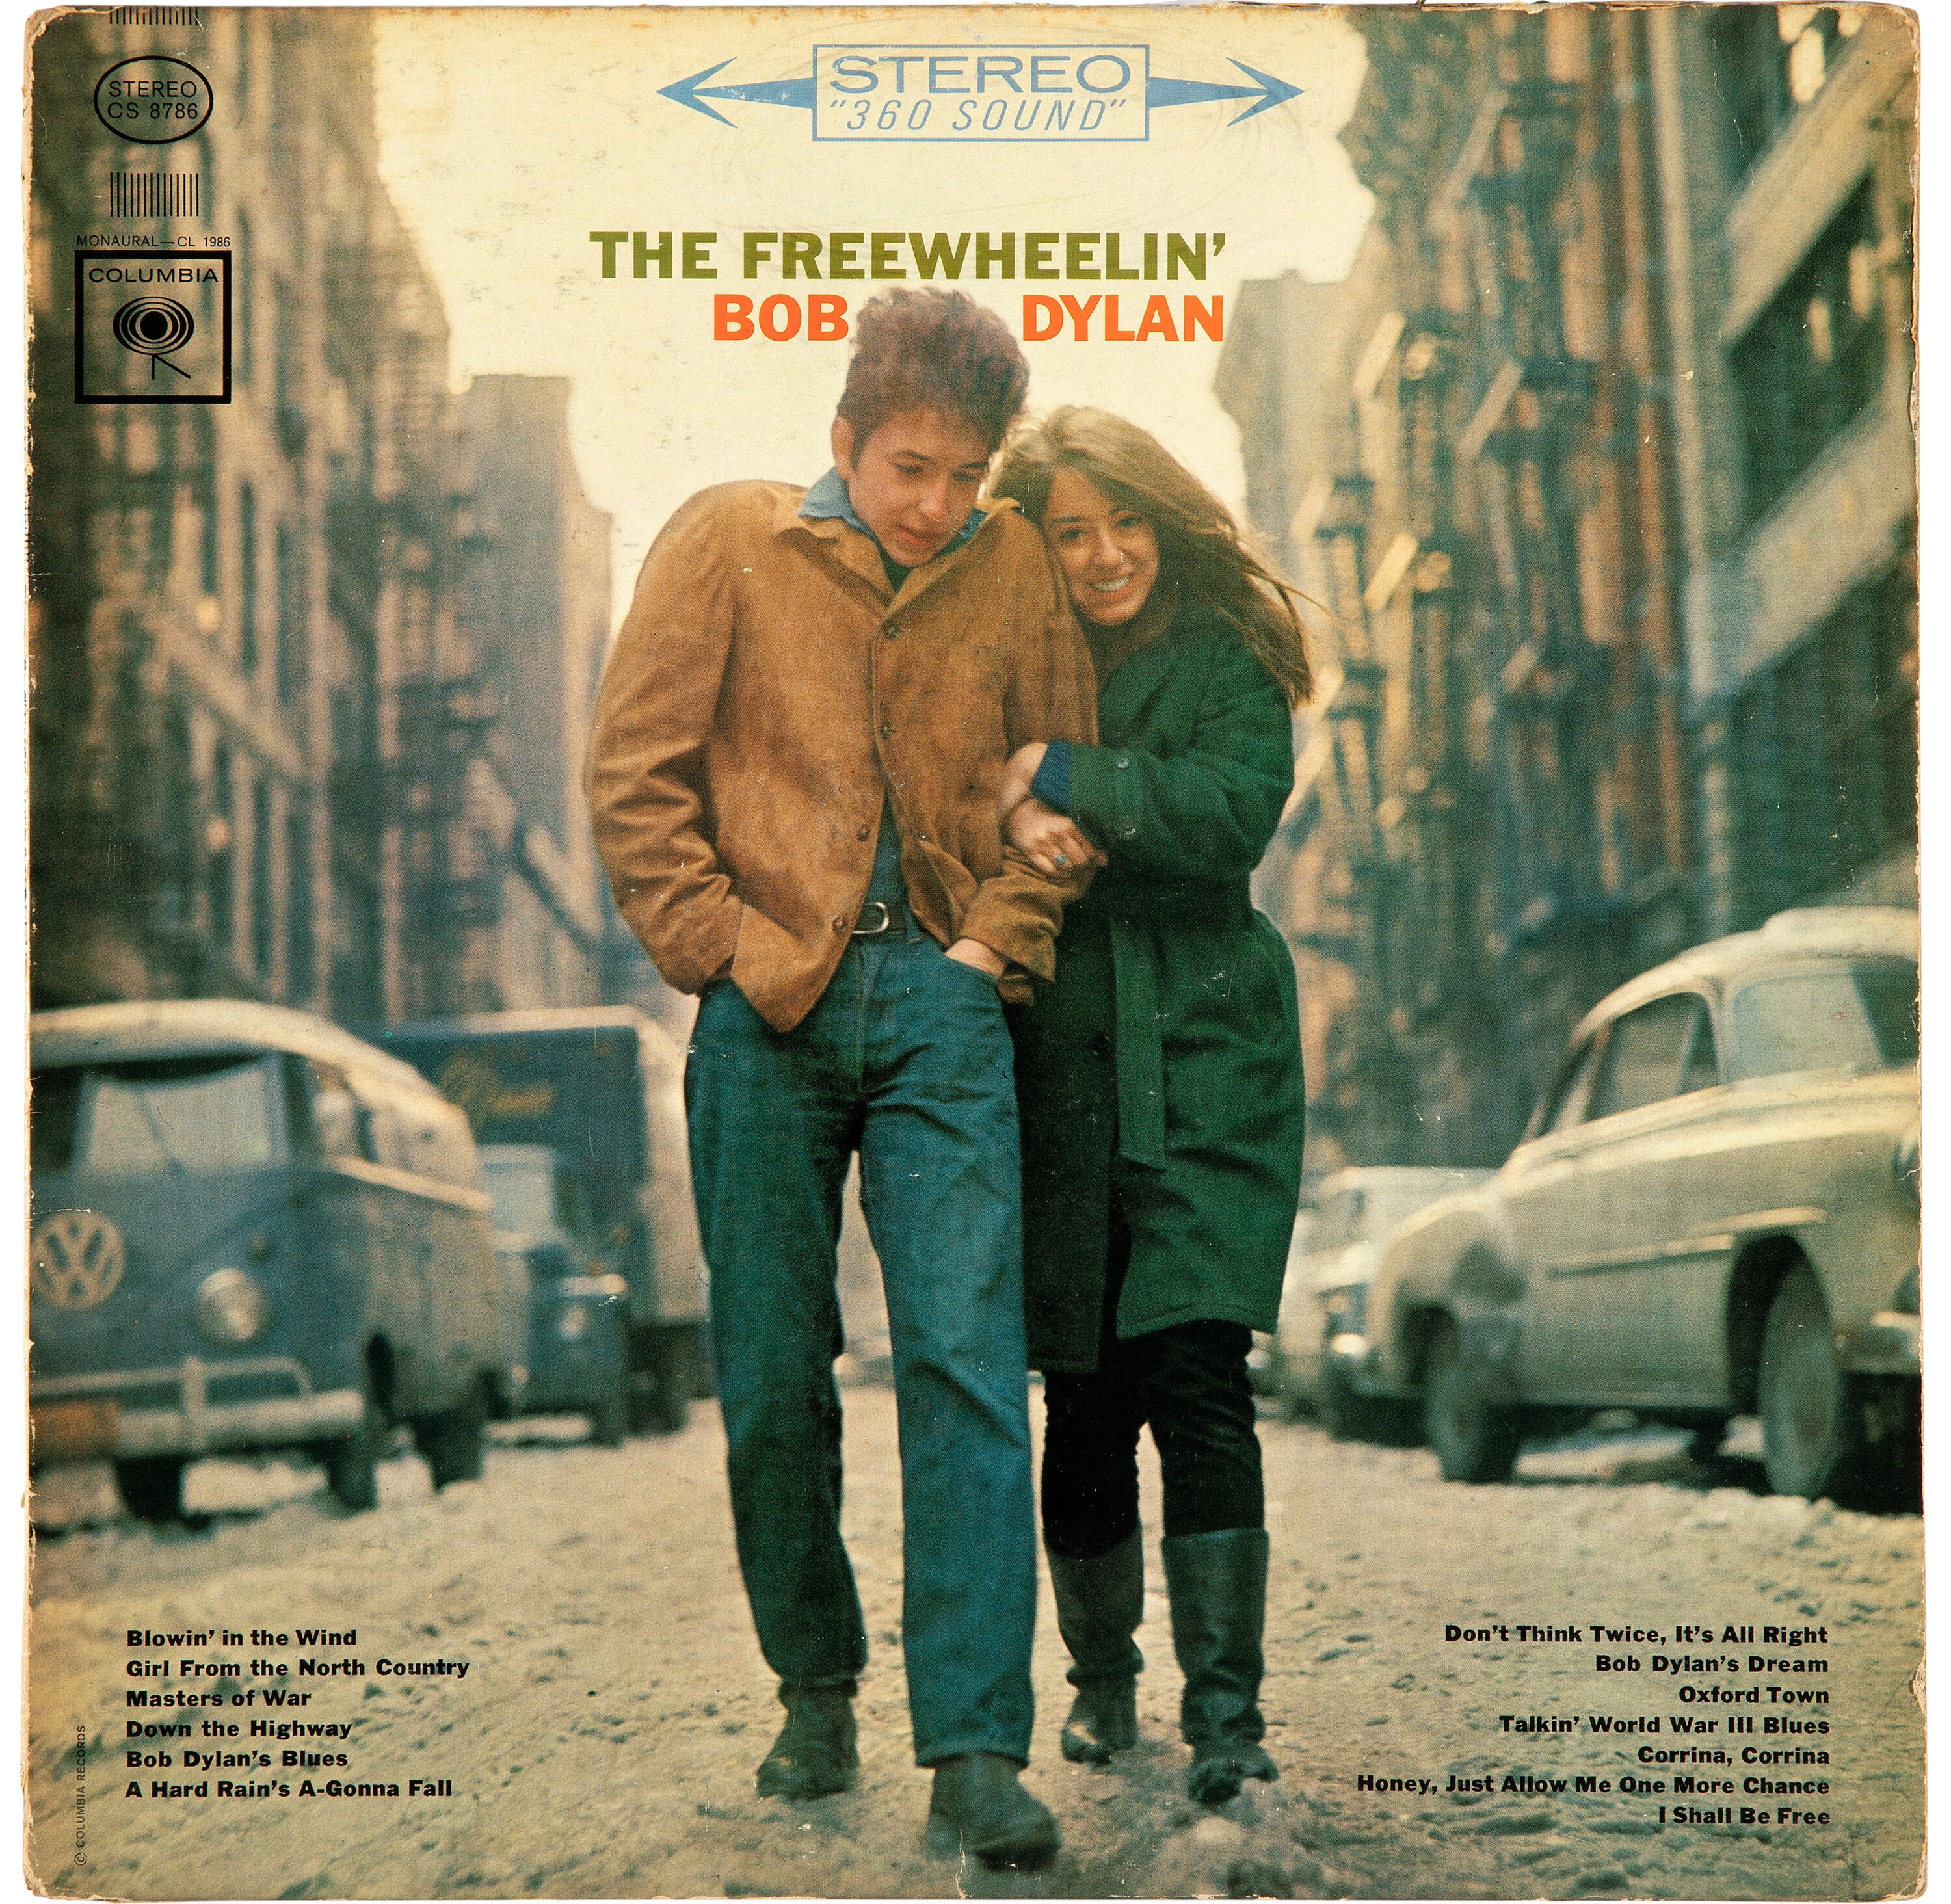 Copy of Bob Dylan’s 1963 ‘Freewheelin’ album that includes four deleted tracks, est. $48,000-$72,000. Image courtesy of Heritage Auctions